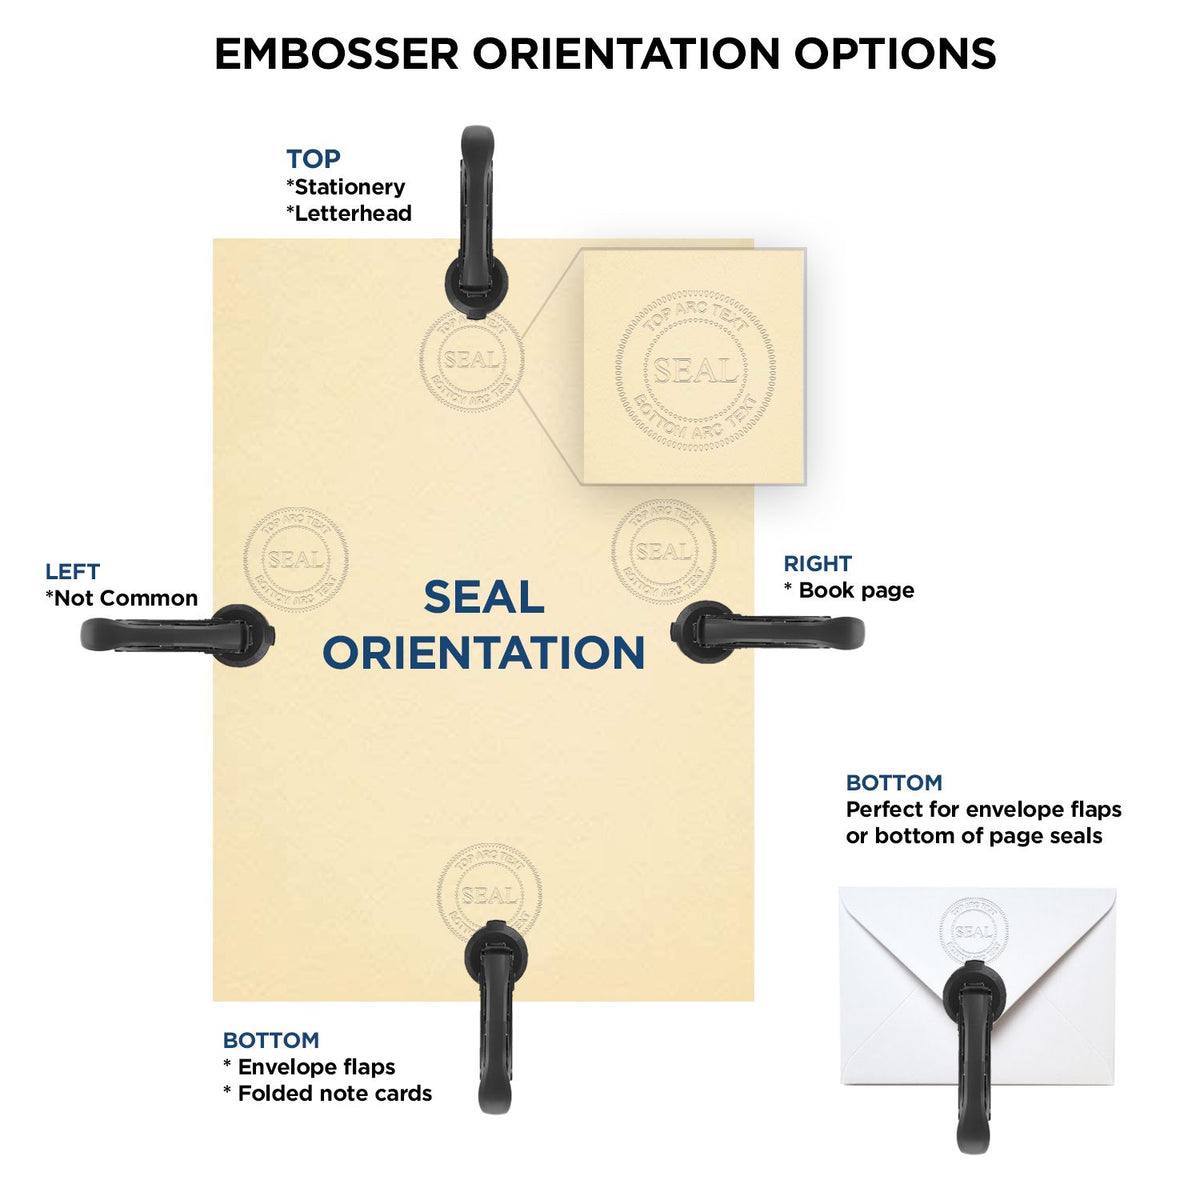 An infographic for the Long Reach Montana PE Seal showing embosser orientation, this is showing examples of a top, bottom, right and left insert.